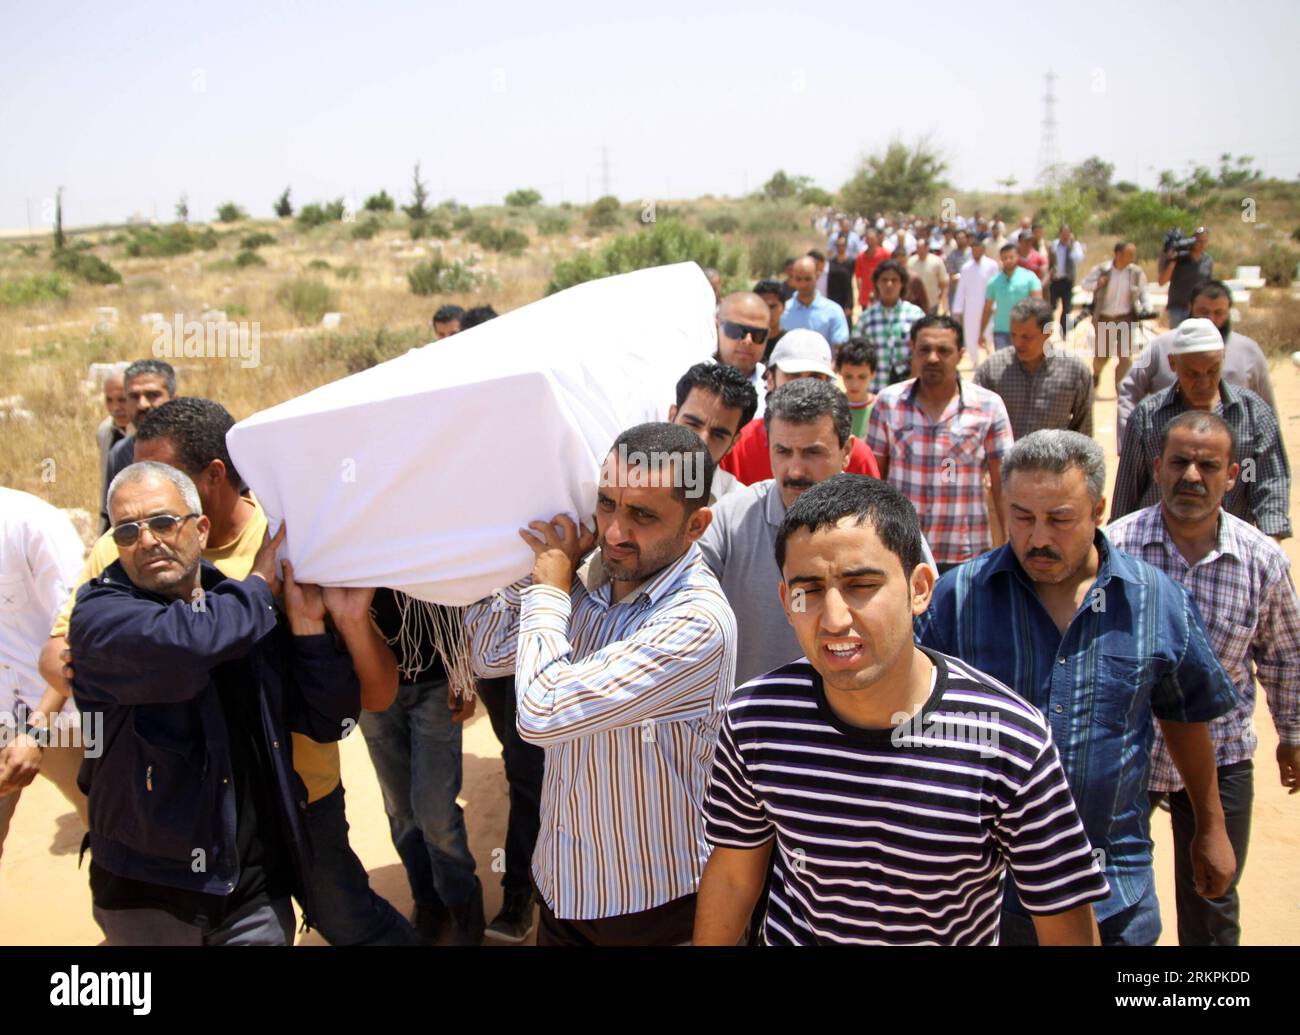 Bildnummer: 58013860  Datum: 21.05.2012  Copyright: imago/Xinhua (120521) -- TRIPOLI, May 21, 2012 (Xinhua) -- Relatives and friends carry the body of Abdelbaset Ali Mohmet al-Megrahi, the only person convicted in the case of the Lockerbie bombing in 1988 that killed 270 people, during his funeral in Janzur, a suburb west of the Libyan capital Tripoli on May 21, 2012. (Xinhua/Hamza Turkia) (srb) LIBYA-TRIPOLI-LOCKERBIE ATTACK-MEGRAHI PUBLICATIONxNOTxINxCHN People Politik Beerdigung Trauerfeier Lockerbie Attentäter Attentat x0x xst premiumd 2012 quer      58013860 Date 21 05 2012 Copyright Imag Stock Photo